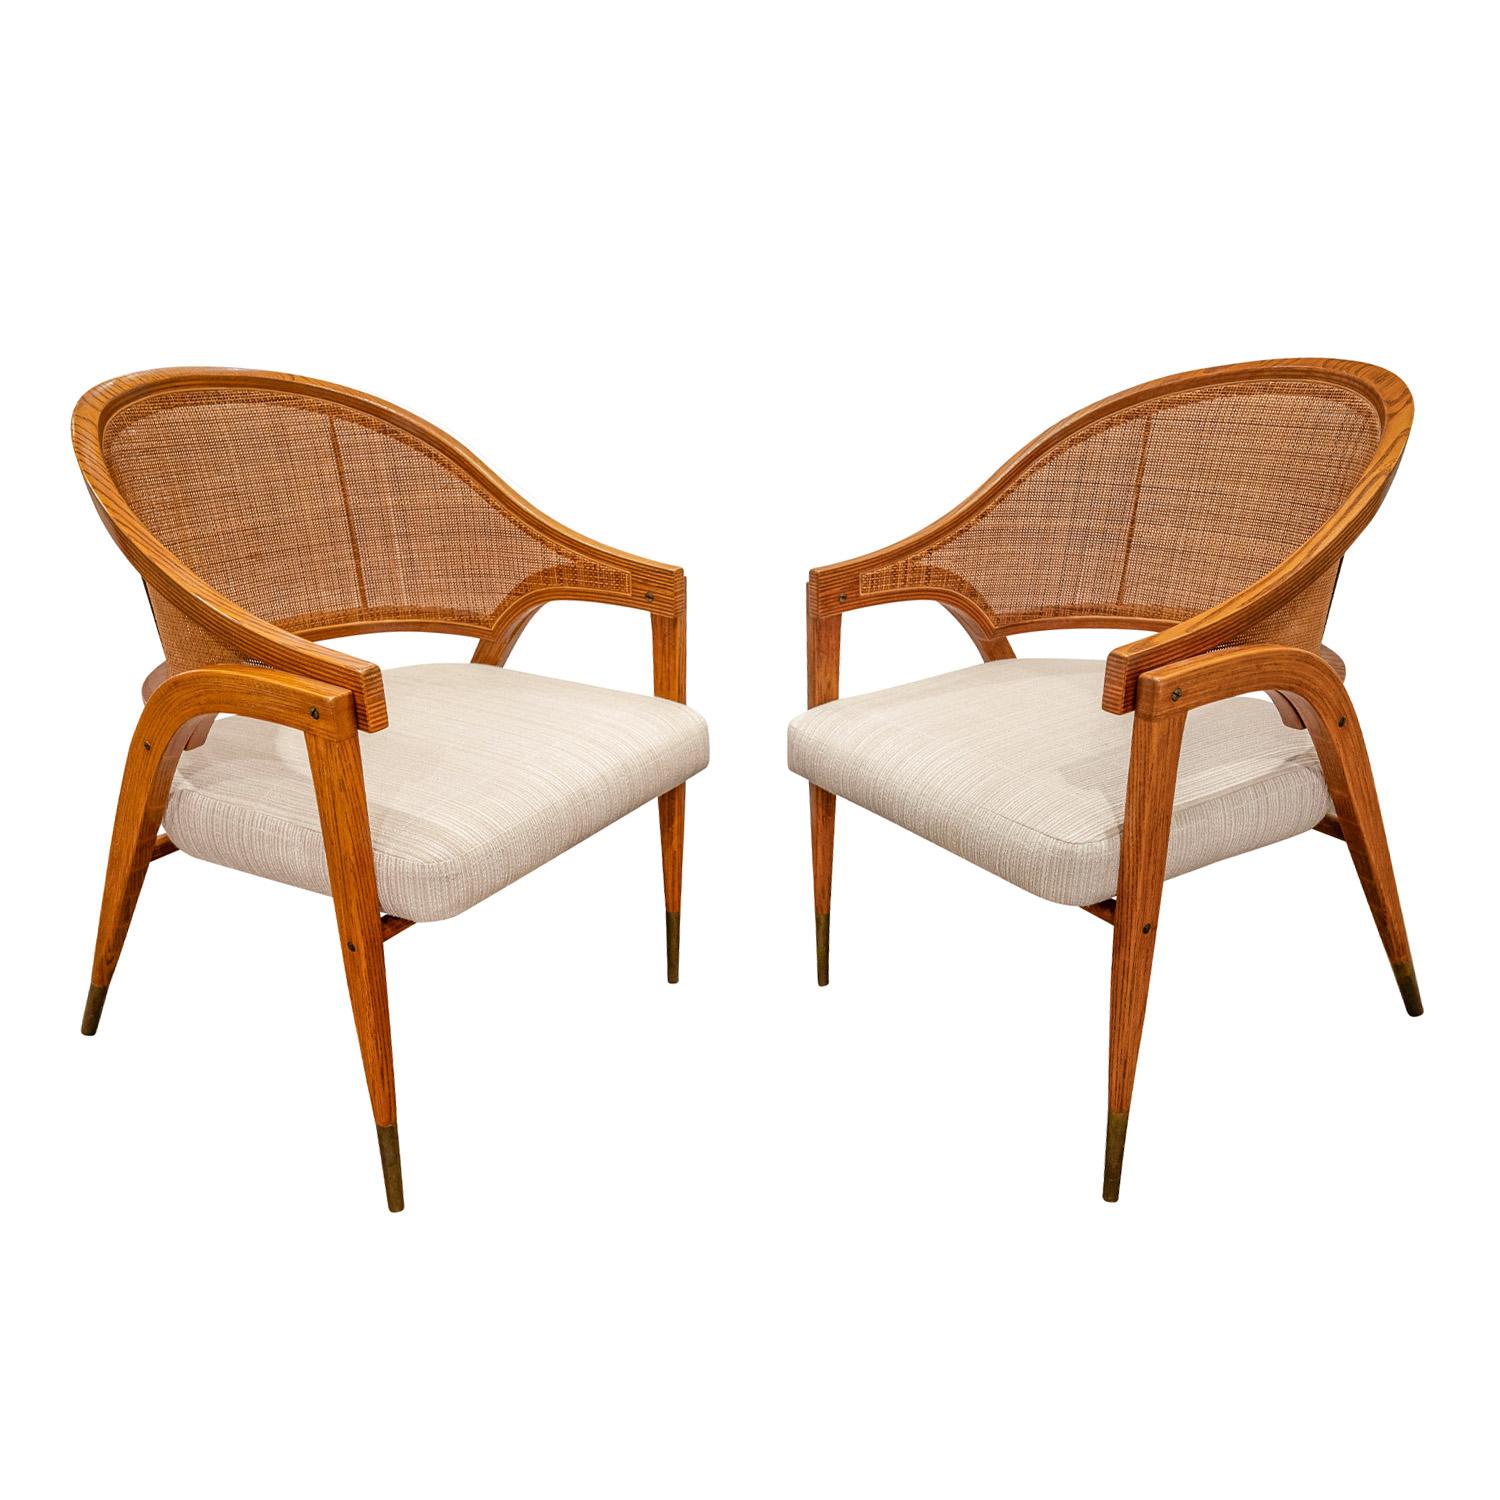 Pair of masterfully crafted lounge chairs model 5480 in laminated ash with caned back and brass sabots by Edward Wormley for Dunbar, American 1954.  These chairs are a tour de force of design.  One of the first pieces made of laminated wood, this